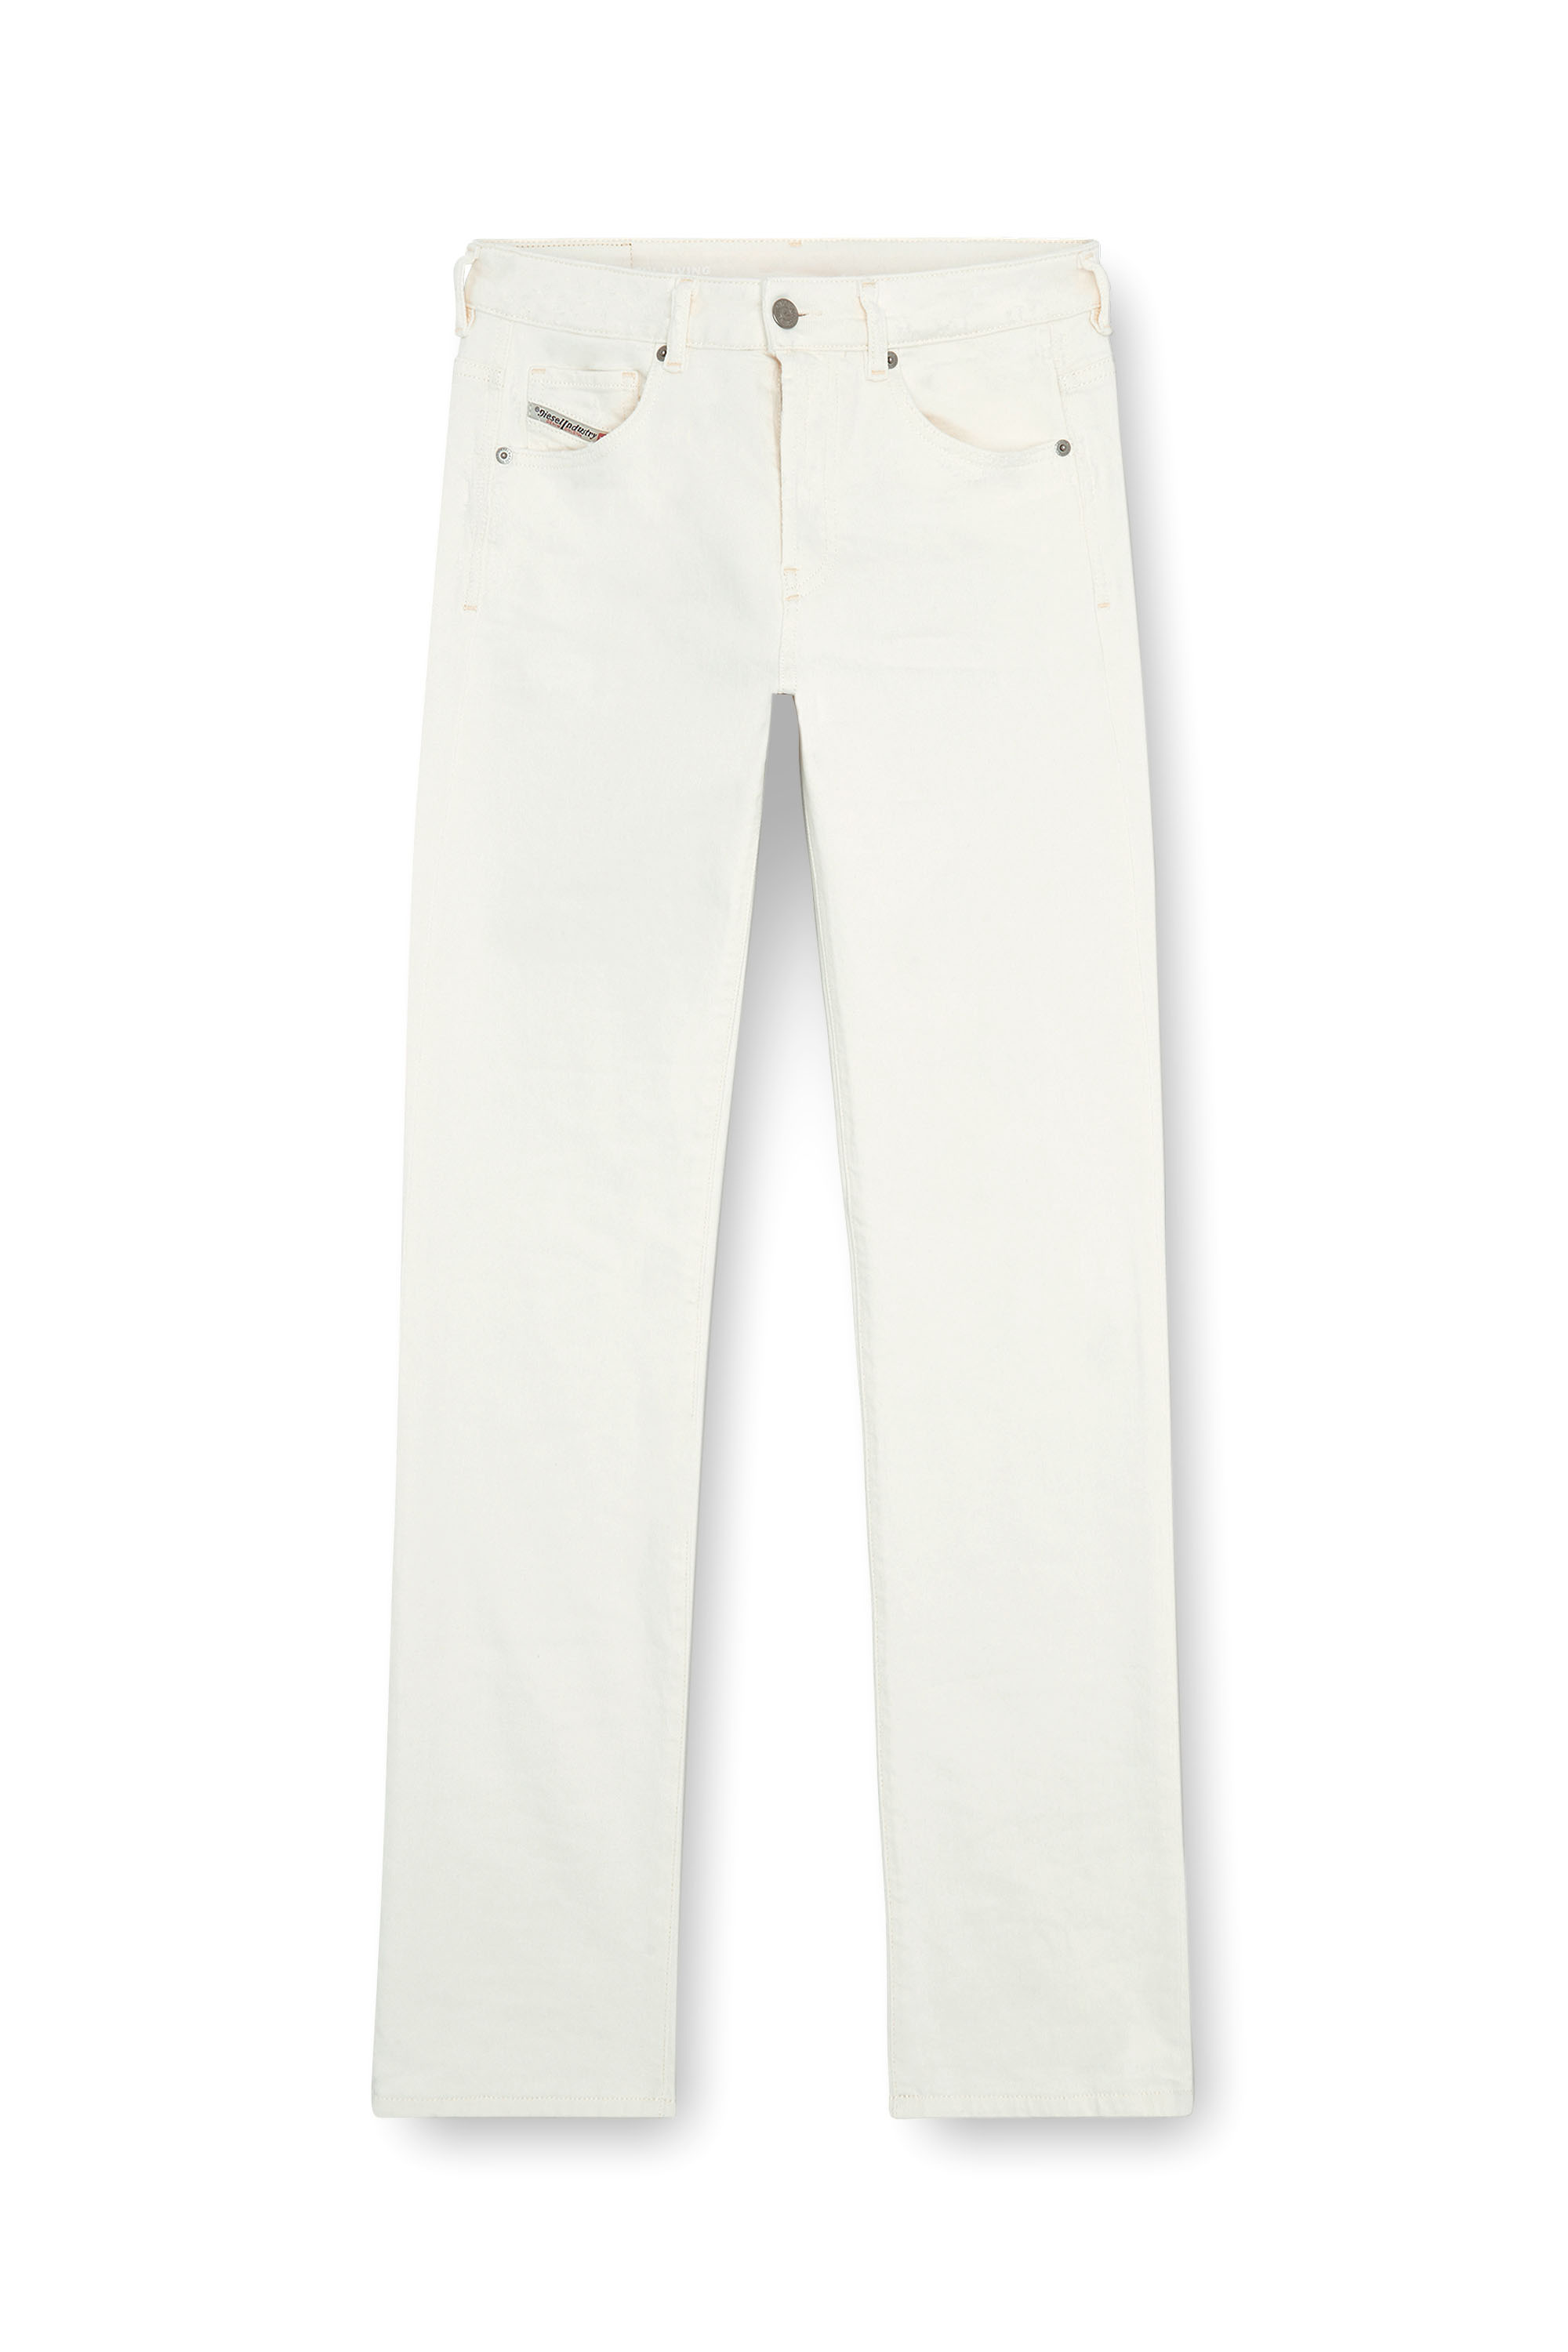 Diesel - Straight Jeans 1989 D-Mine 09I15, Mujer Straight Jeans - 1989 D-Mine in Blanco - Image 3